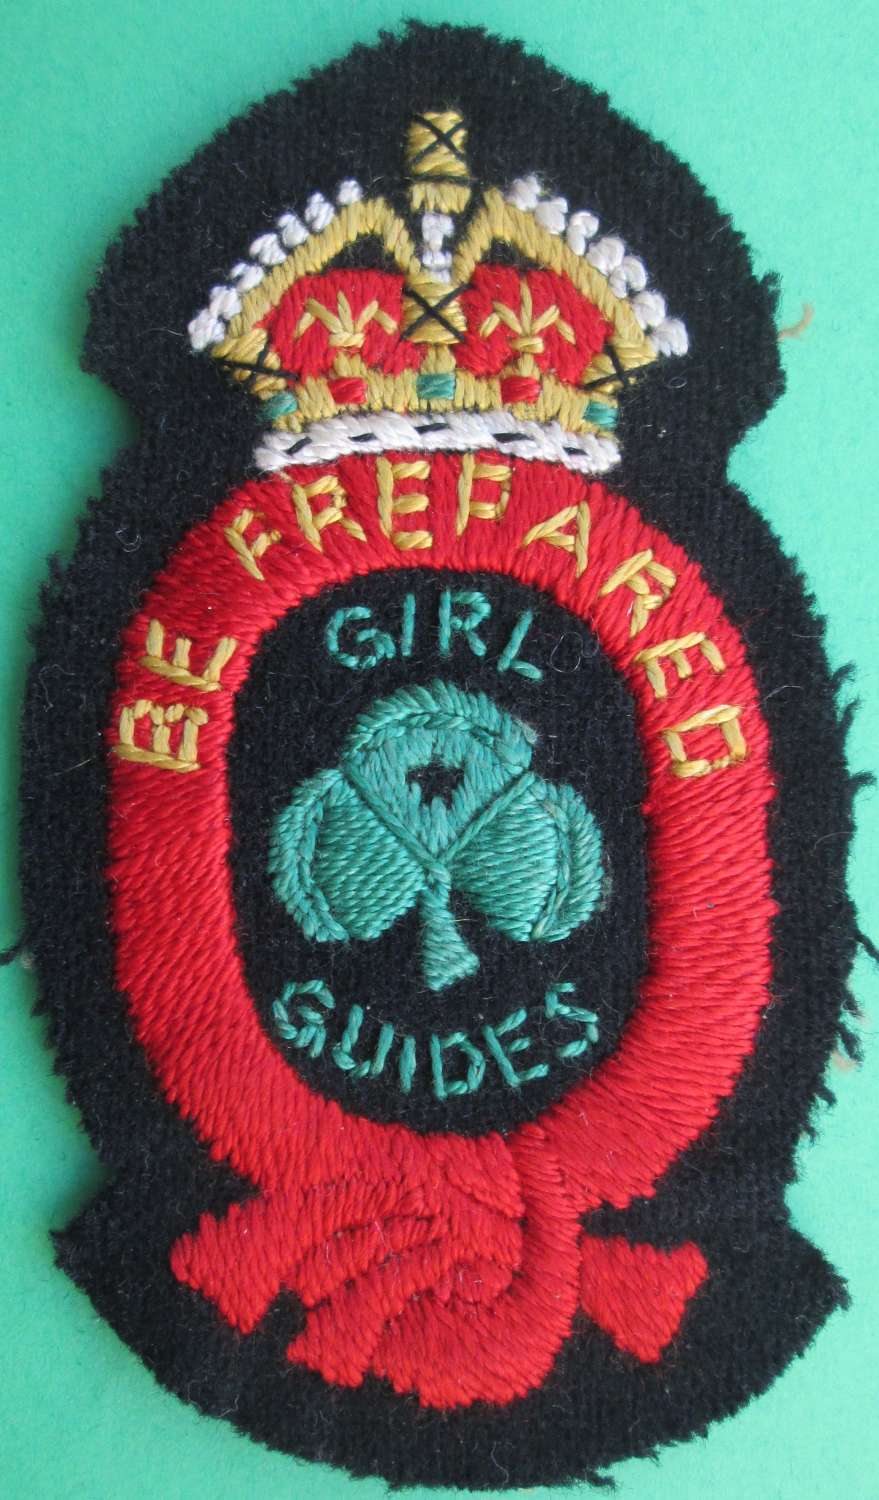 A VERY GOOD PRE 1952 GIRL GUIDES KINGS BADGE 1947-1950